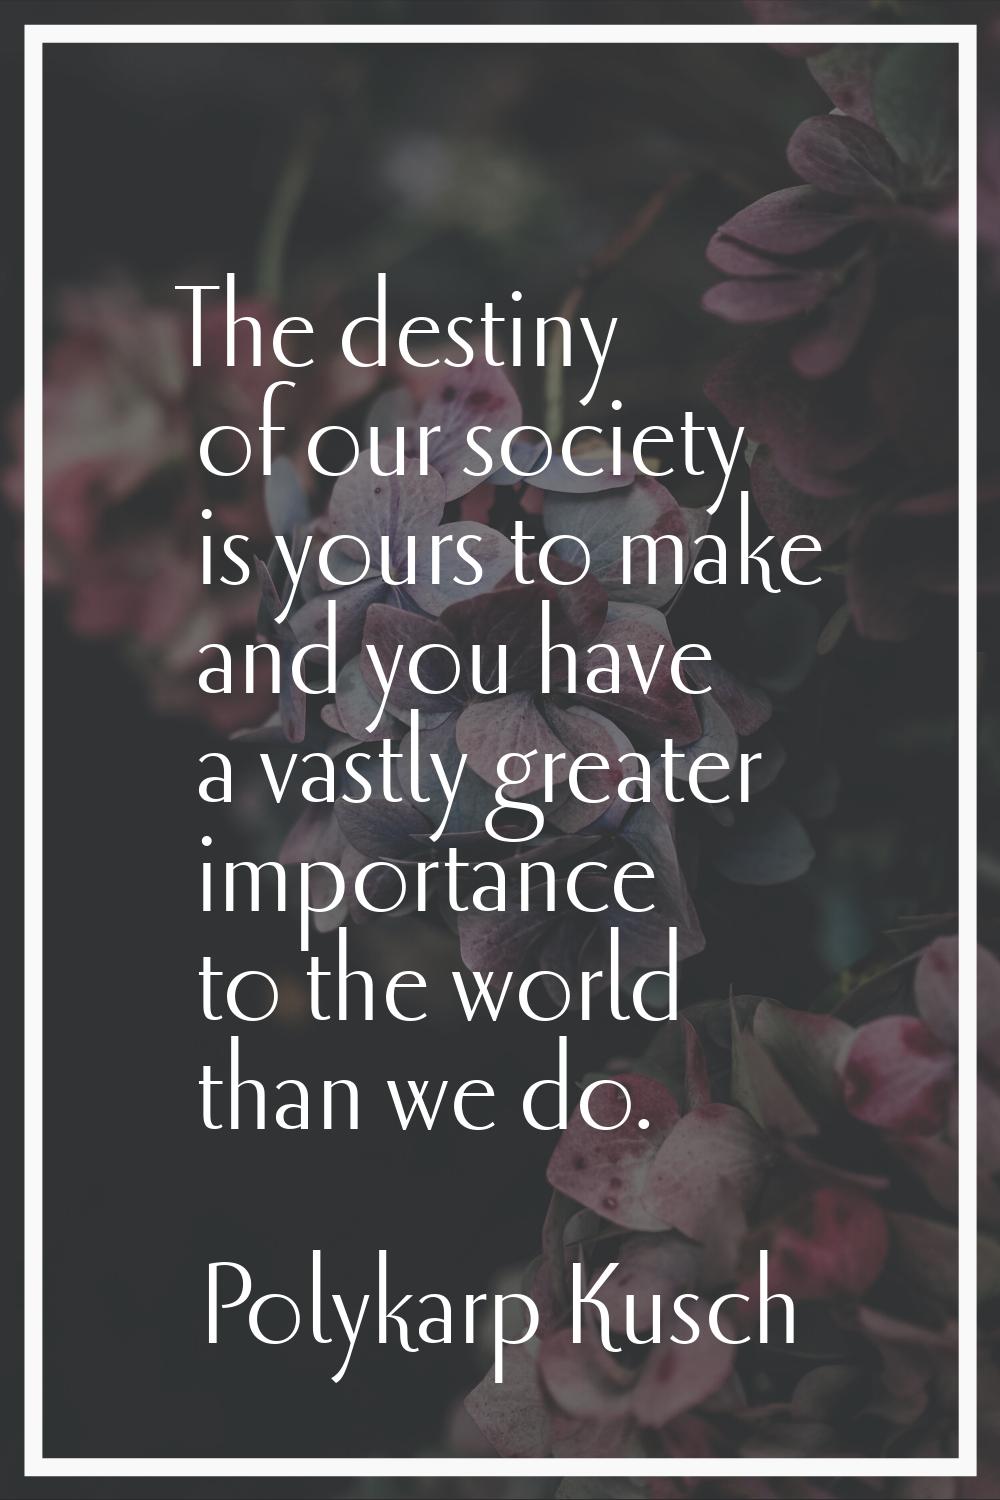 The destiny of our society is yours to make and you have a vastly greater importance to the world t